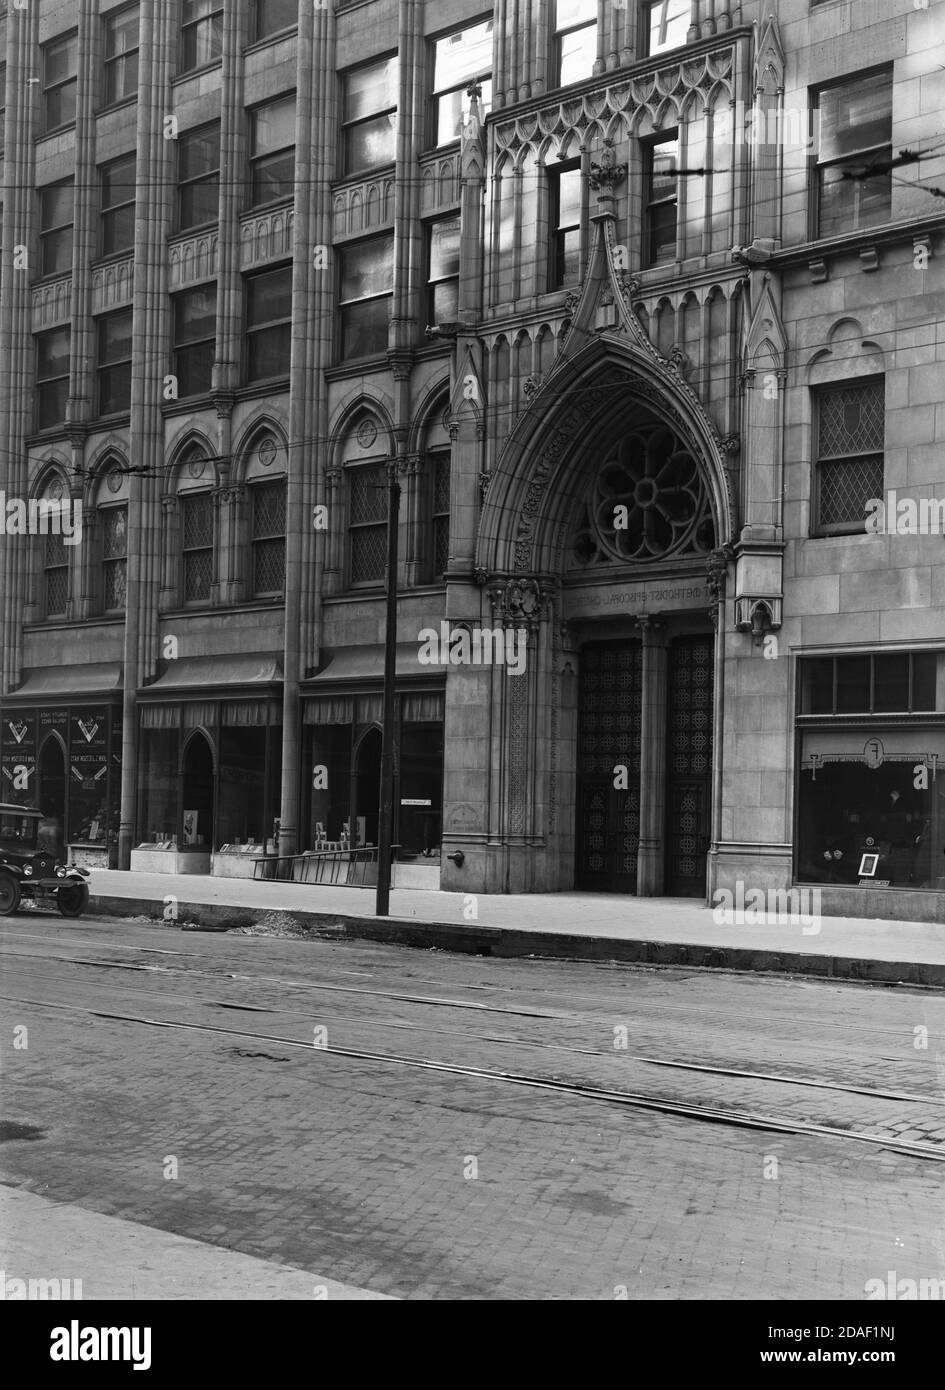 Exterior of Clark Street entrance to Chicago Temple Building, architect Holabird and Roche, in Chicago, Illinois, circa 1923-1936. Stock Photo